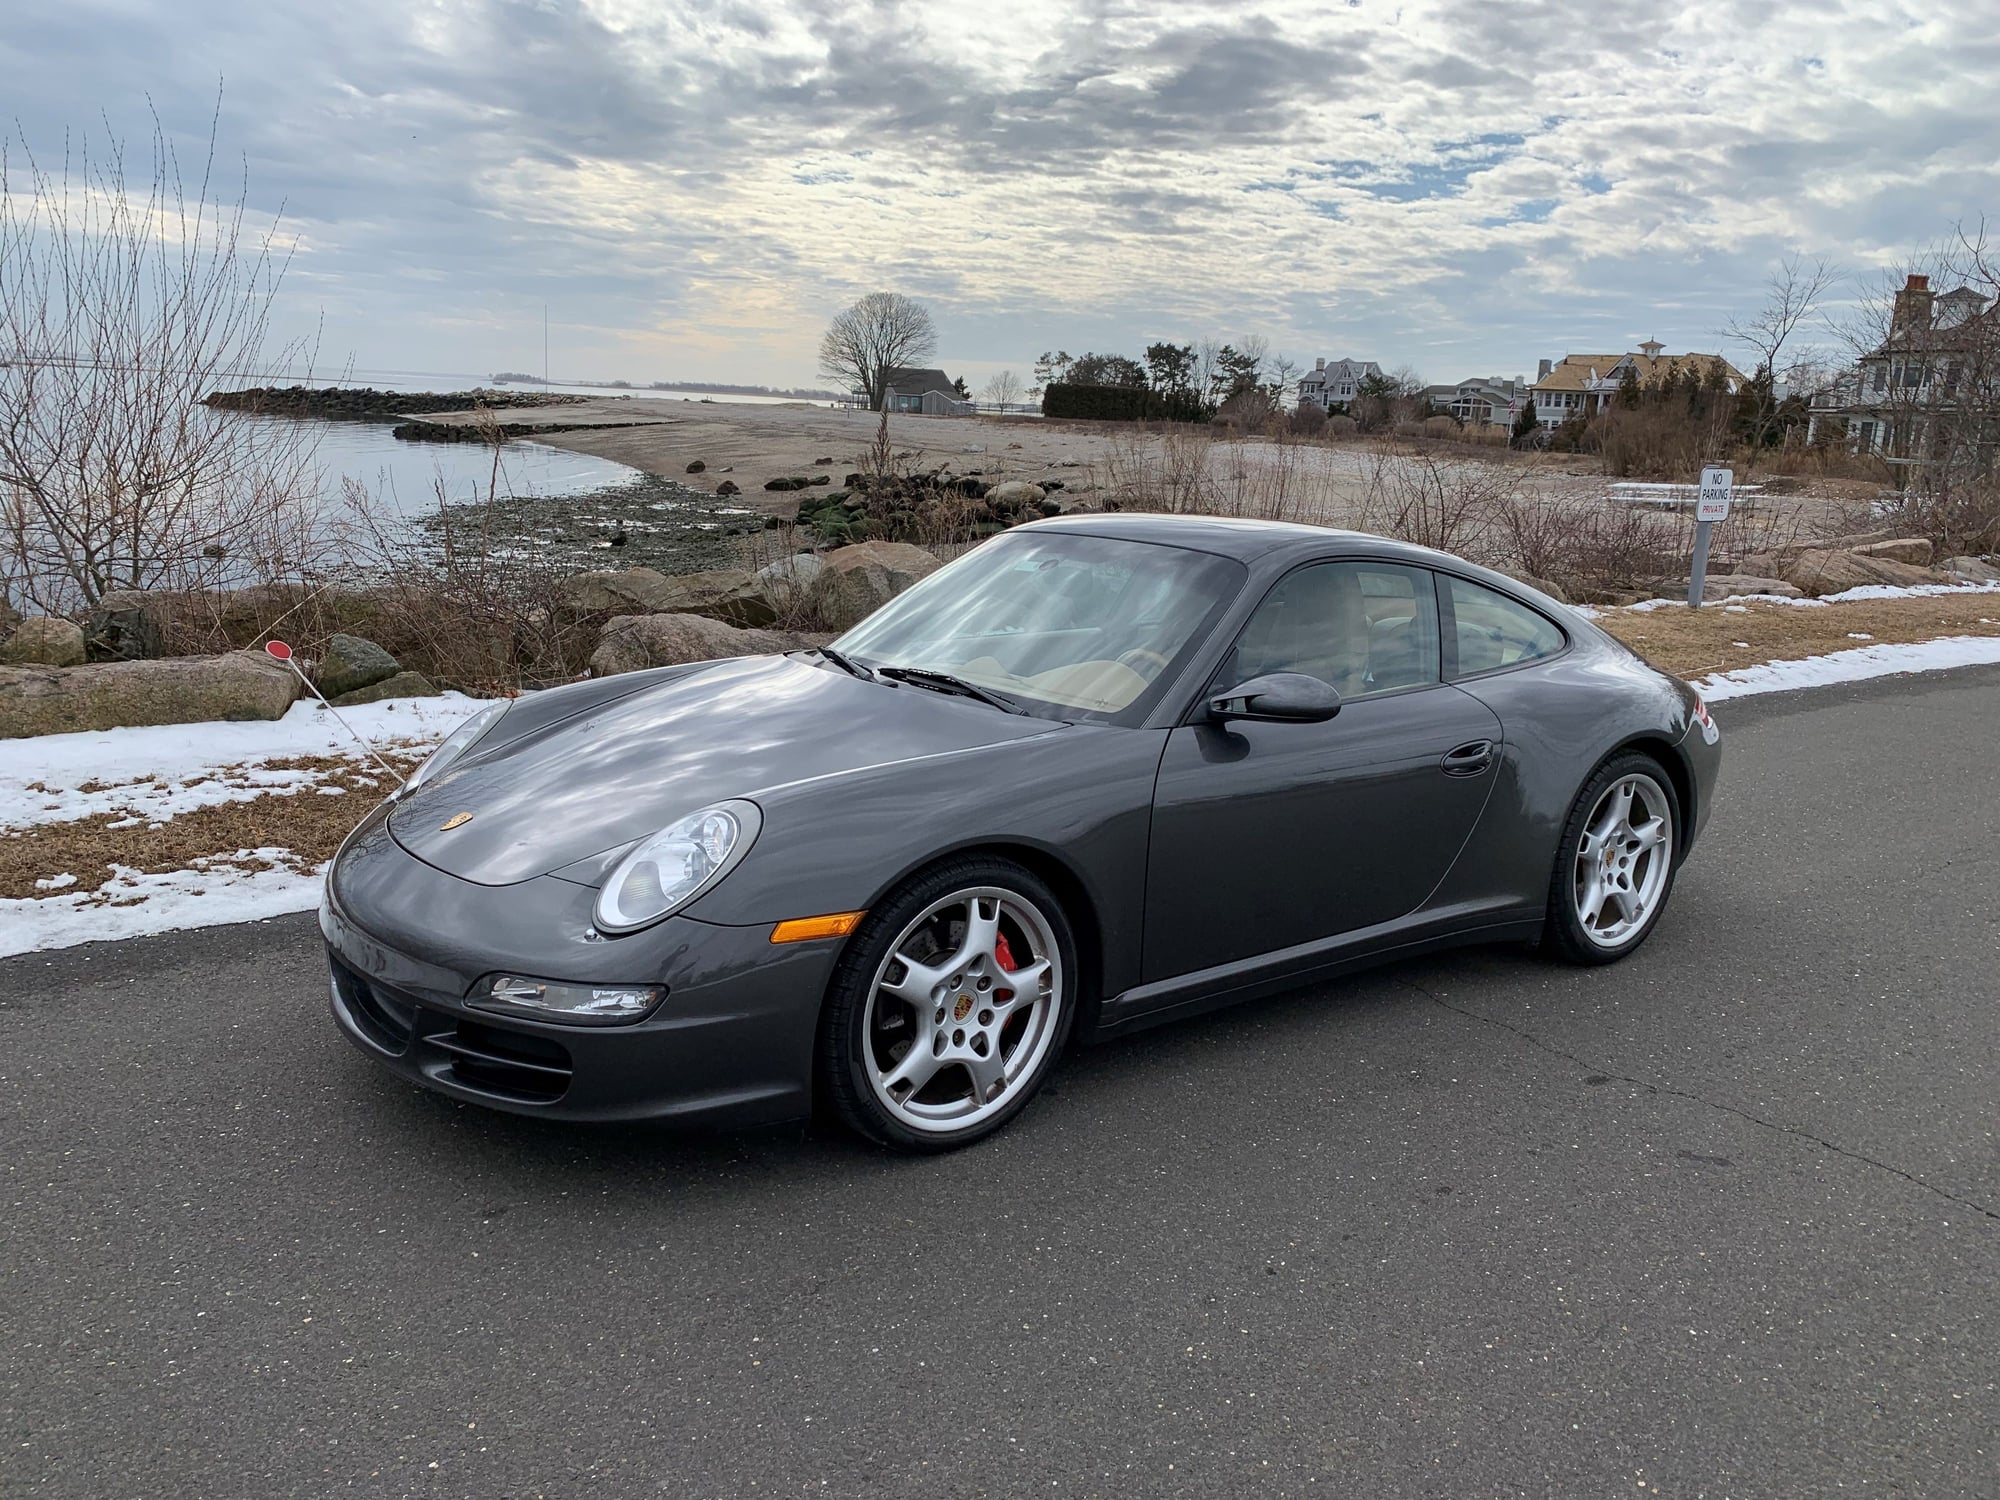 2007 Porsche 911 - 2007 Porsche 911 Carrera 4S - 6sp Manual - Used - VIN WP0AB29947S730343 - 69,500 Miles - 6 cyl - AWD - Manual - Coupe - Gray - Westport, CT 06880, United States